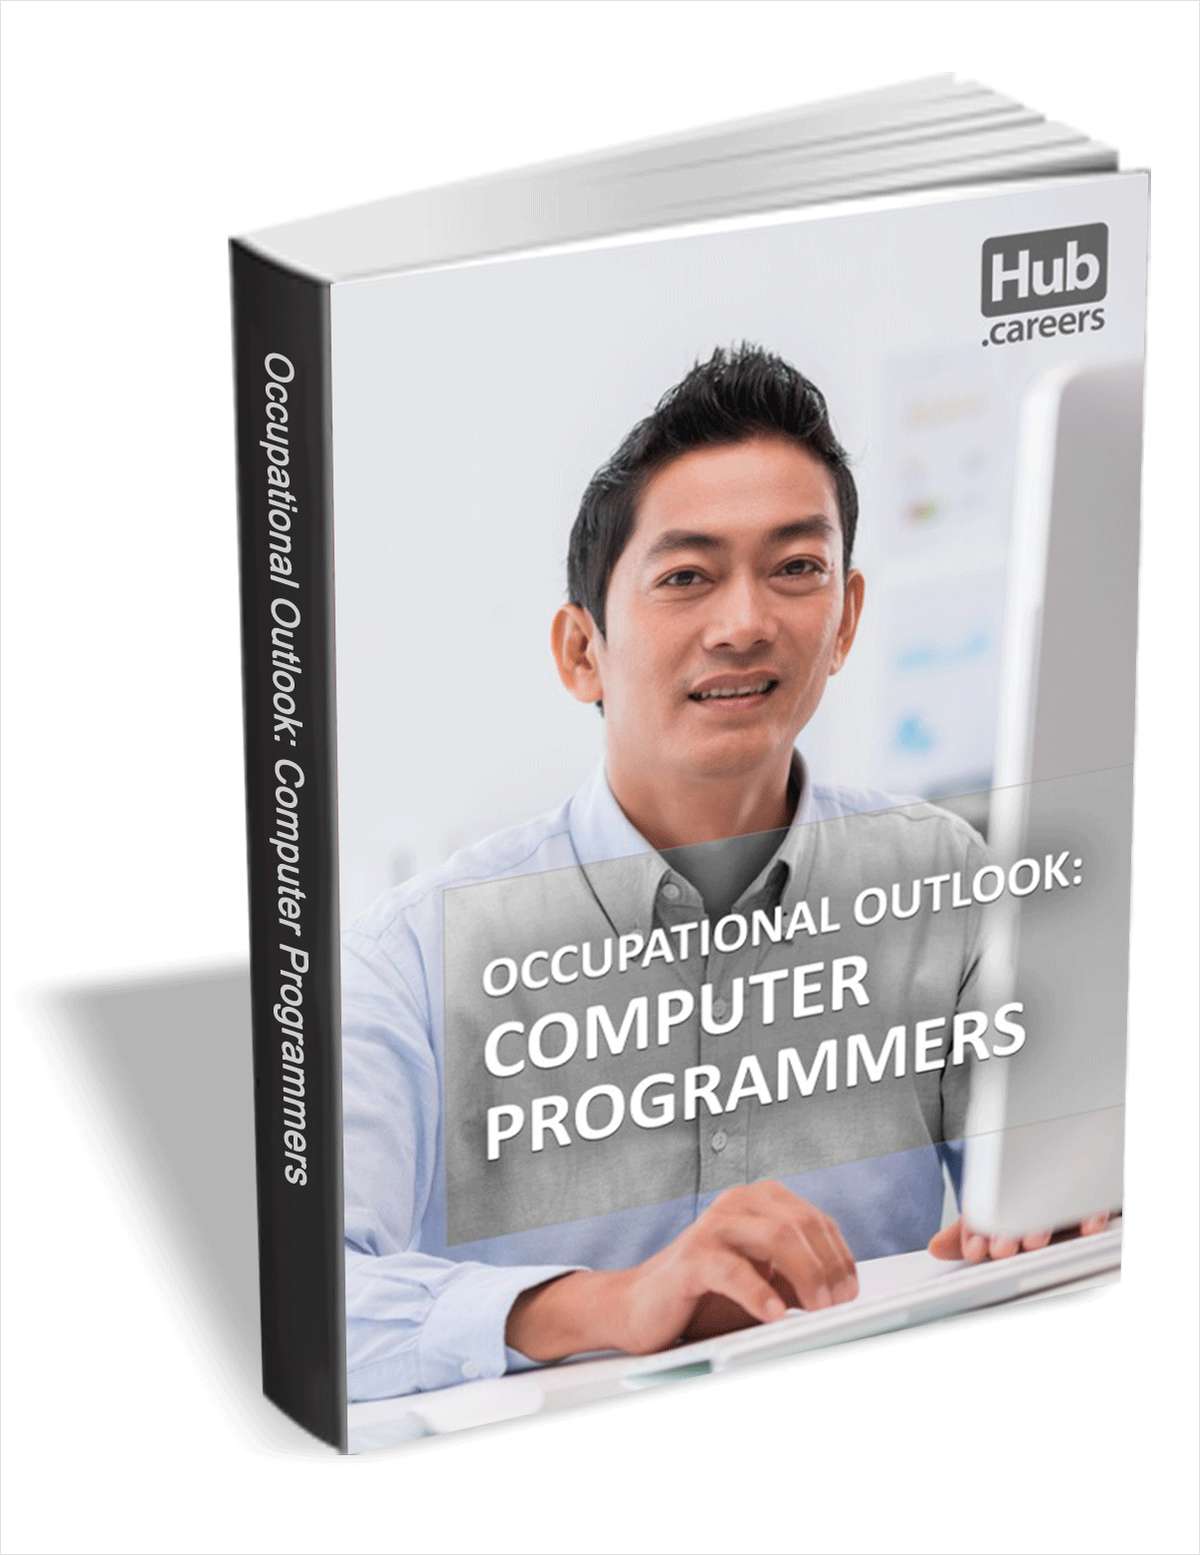 Computer Programmers - Occupational Outlook